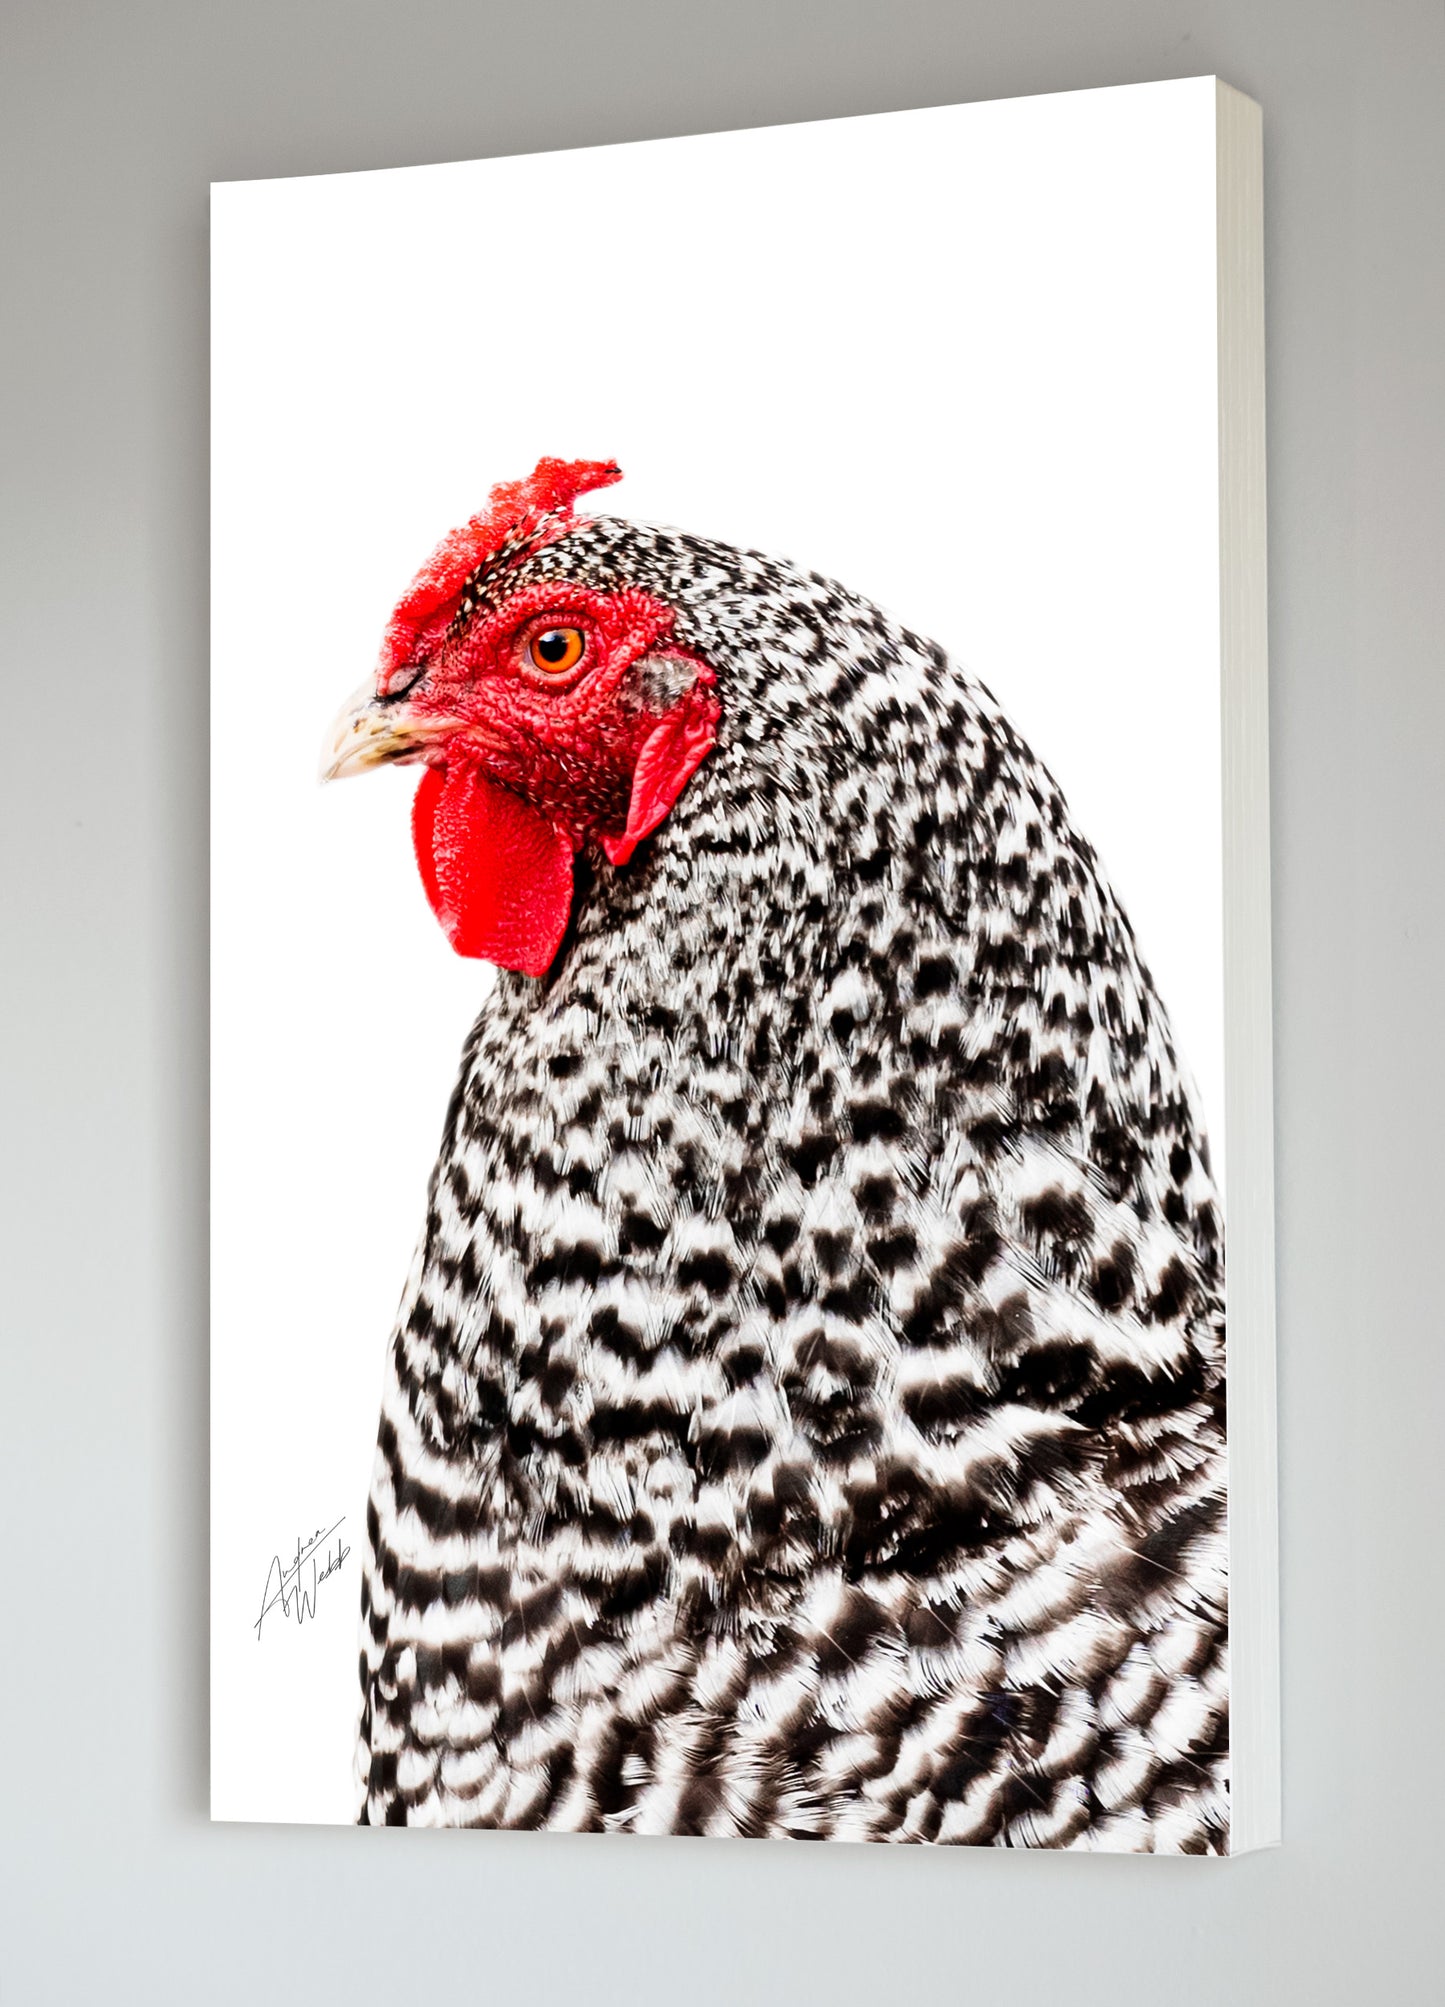 Barred Rock Hen Chicken Portrait on White Background Fine Art Portrait in Country Chic Room. Chicken art. Chicken wall art. Chicken canvas. Chicken prints. Chicken gifts. Animal Photography. Chicken decor. Country chic wall decor.